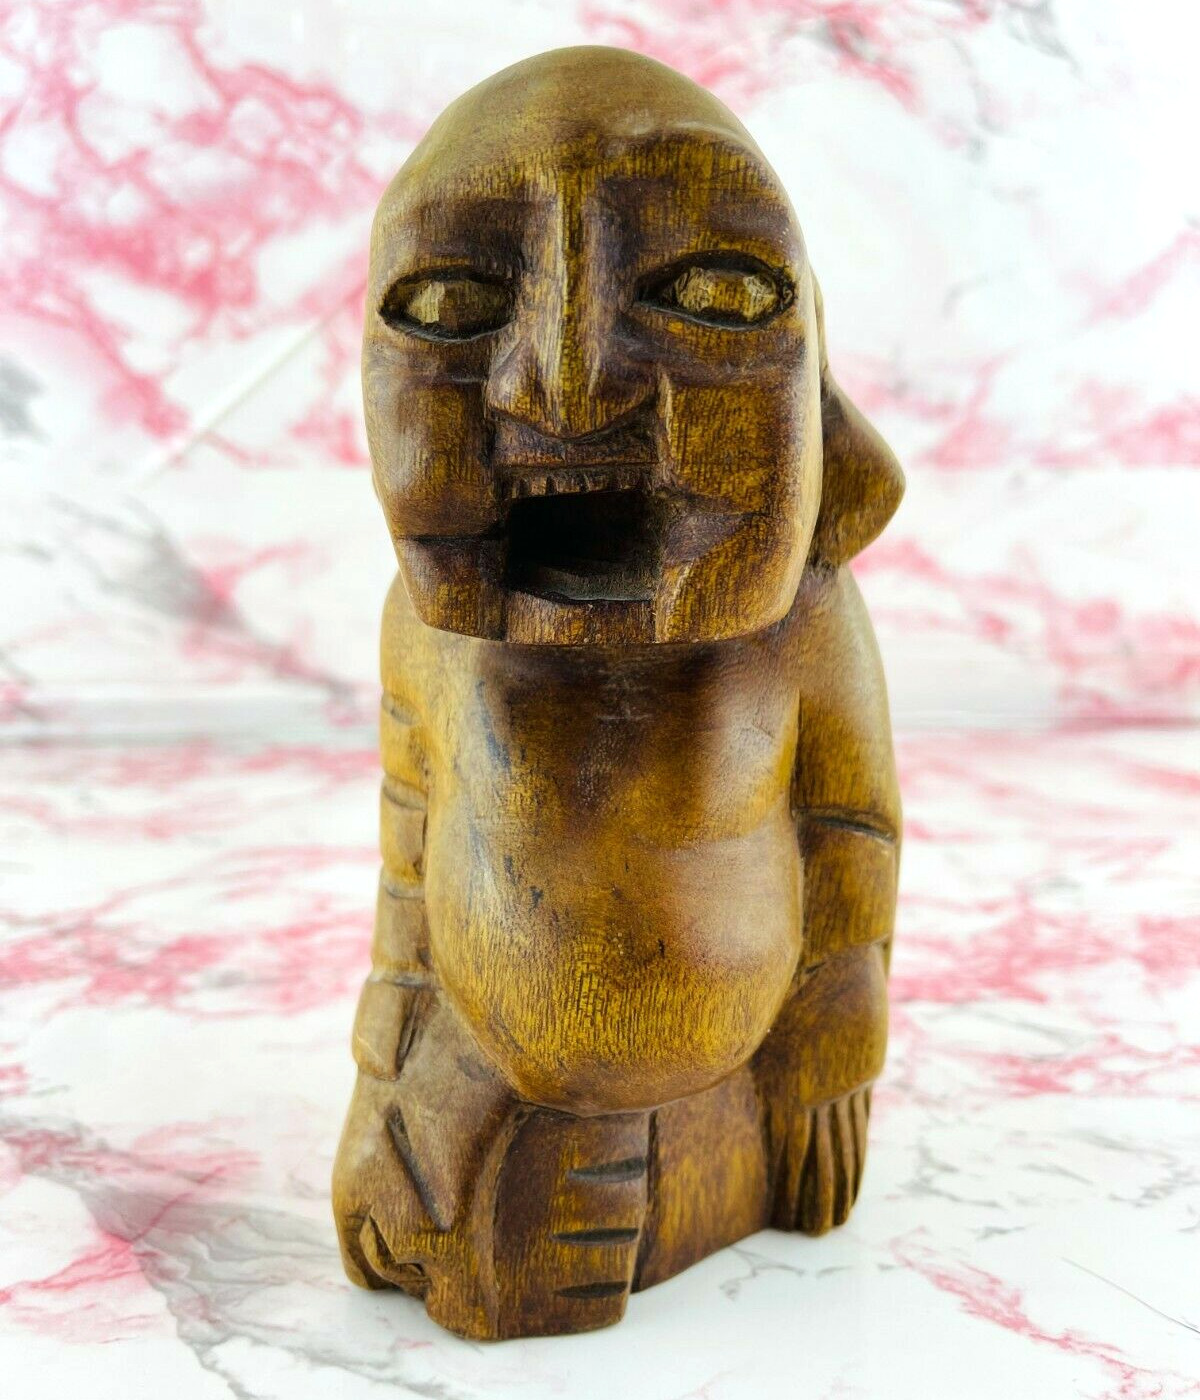 Wooden Laughing Buddha Statue Art Hand Carved